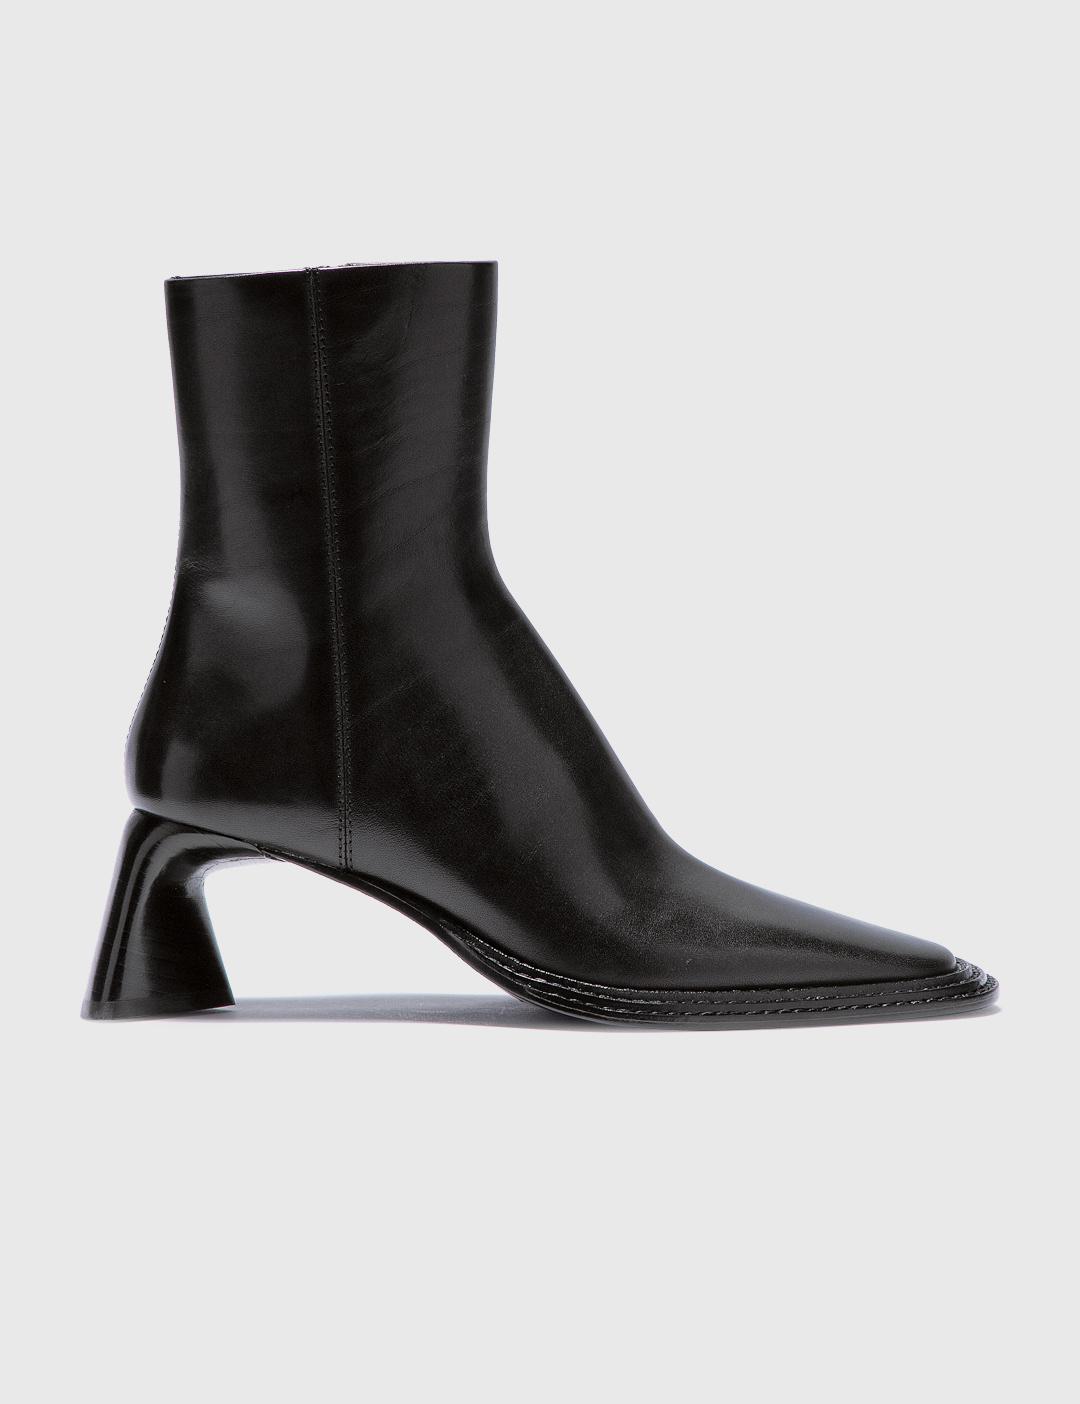 Booker 60 Ankle Boots by ALEXANDER WANG